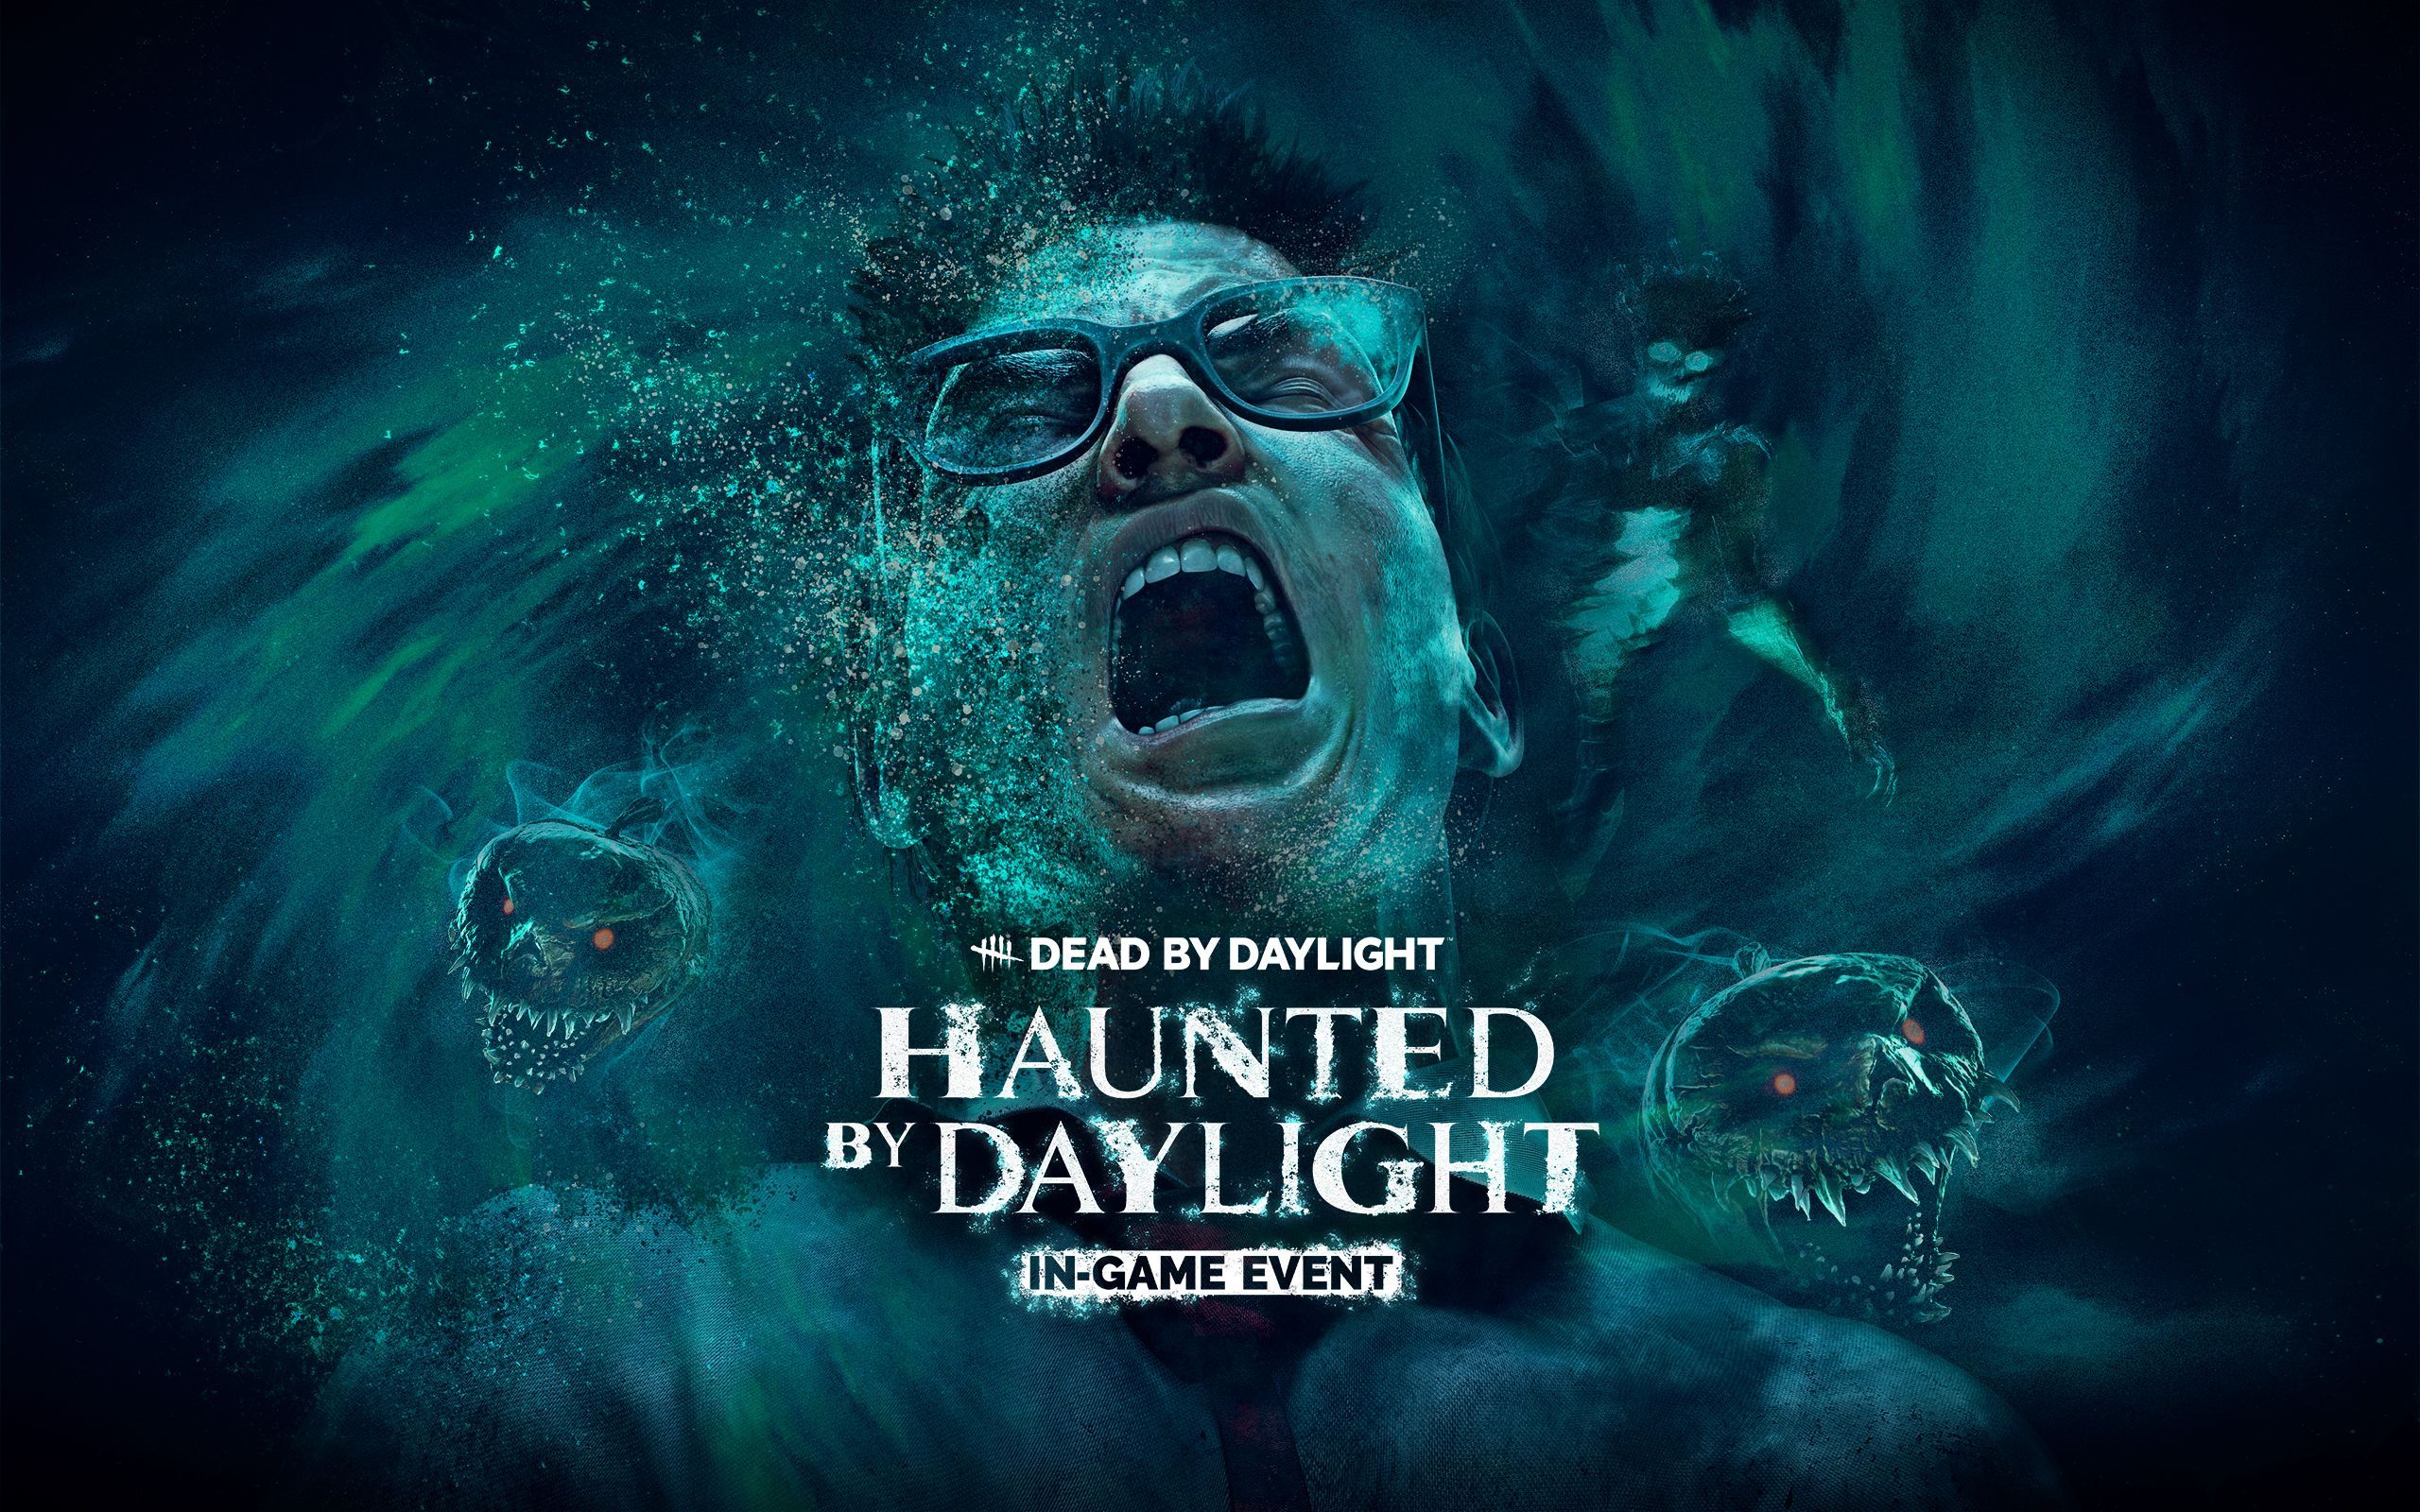 Dead By Daylight Halloween Event “Haunted By Daylight” Launches mxdwn